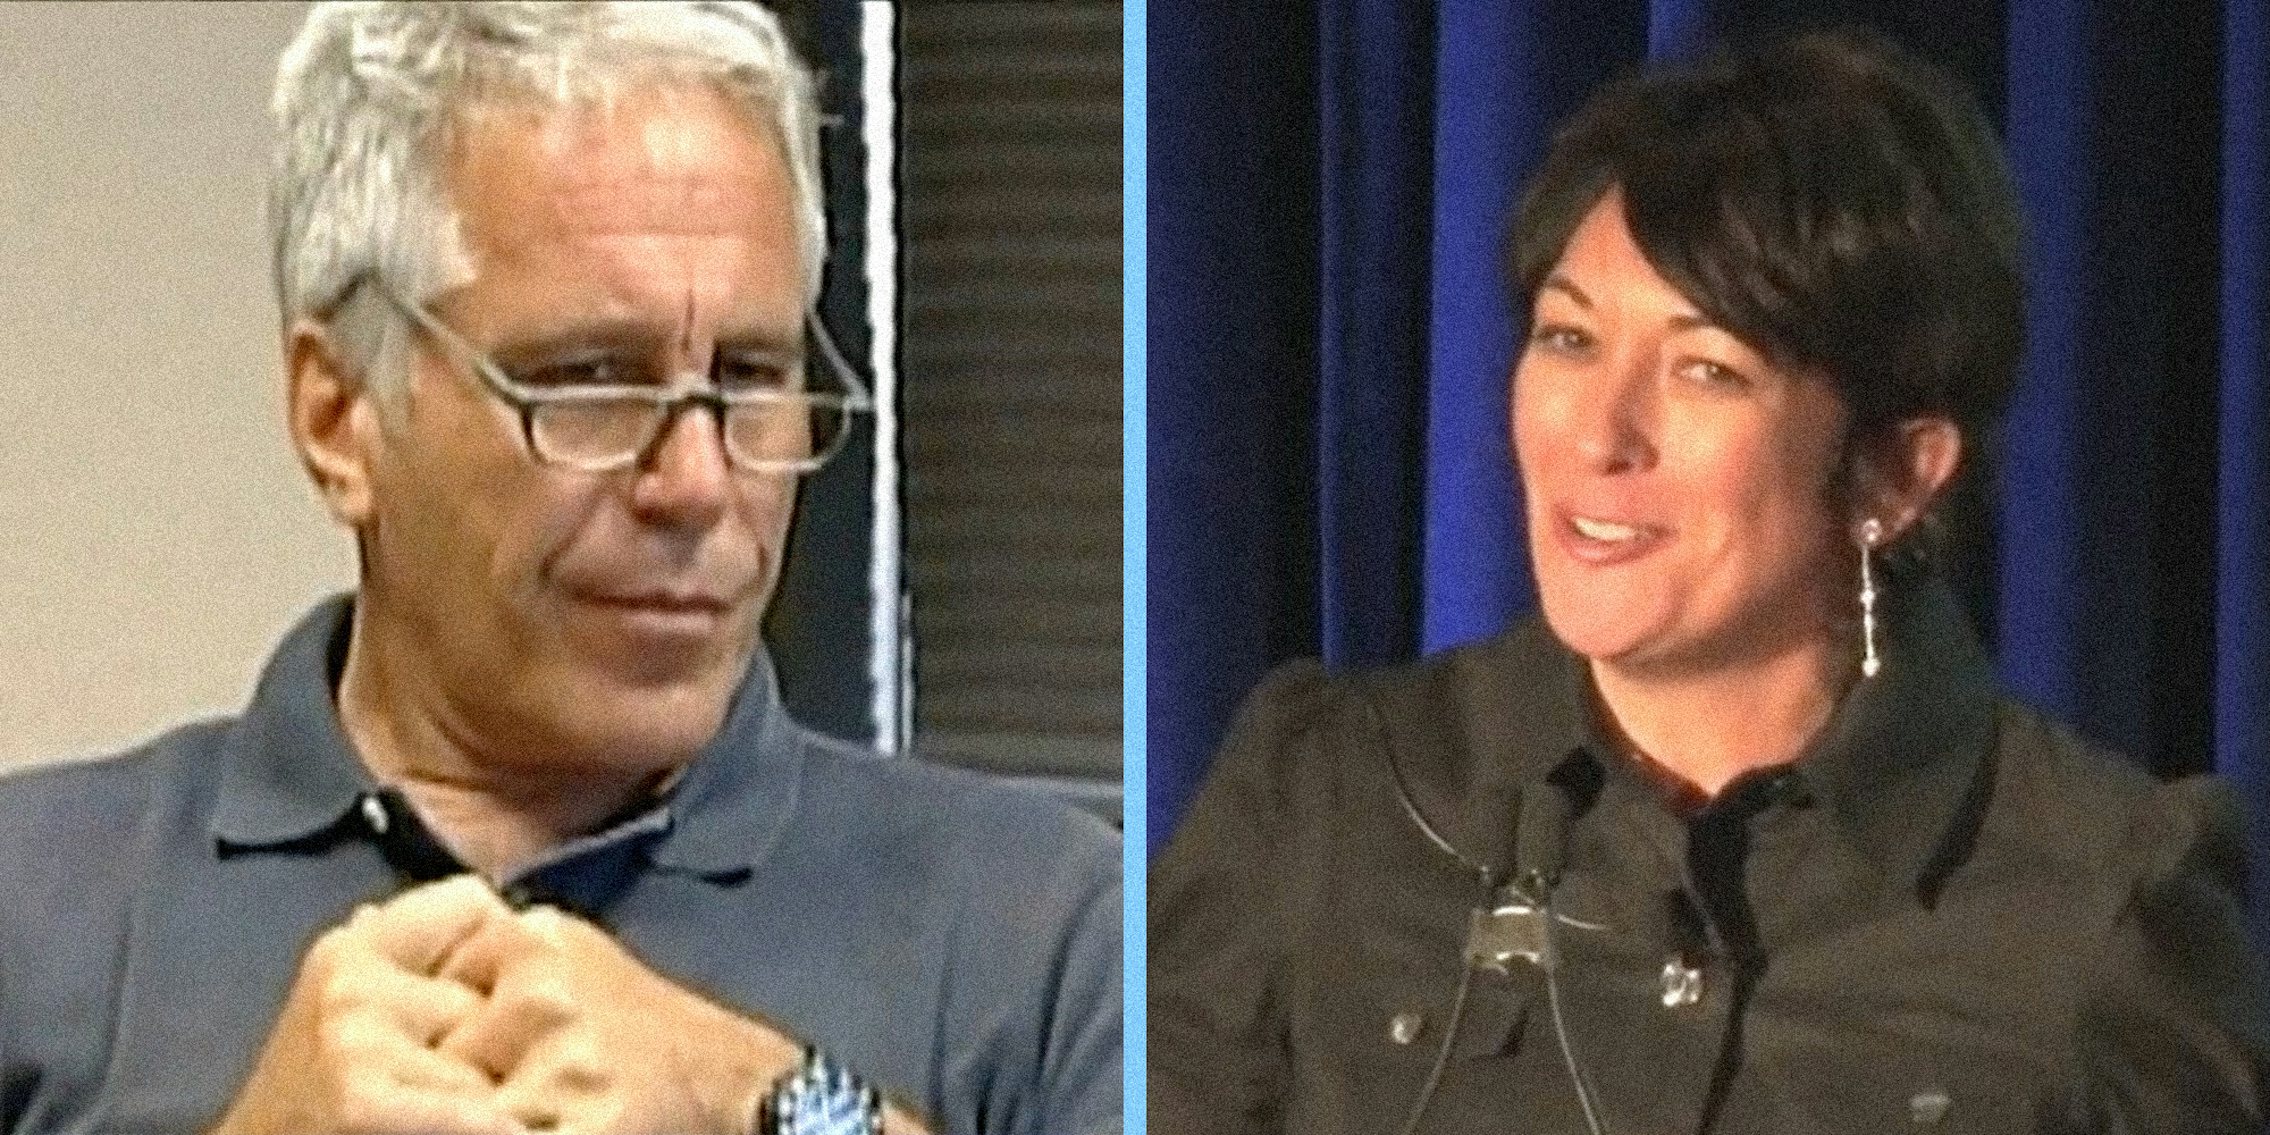 Jeffrey Epstein looking off camera (L) and Ghislaine Maxwell looking off camera (R).